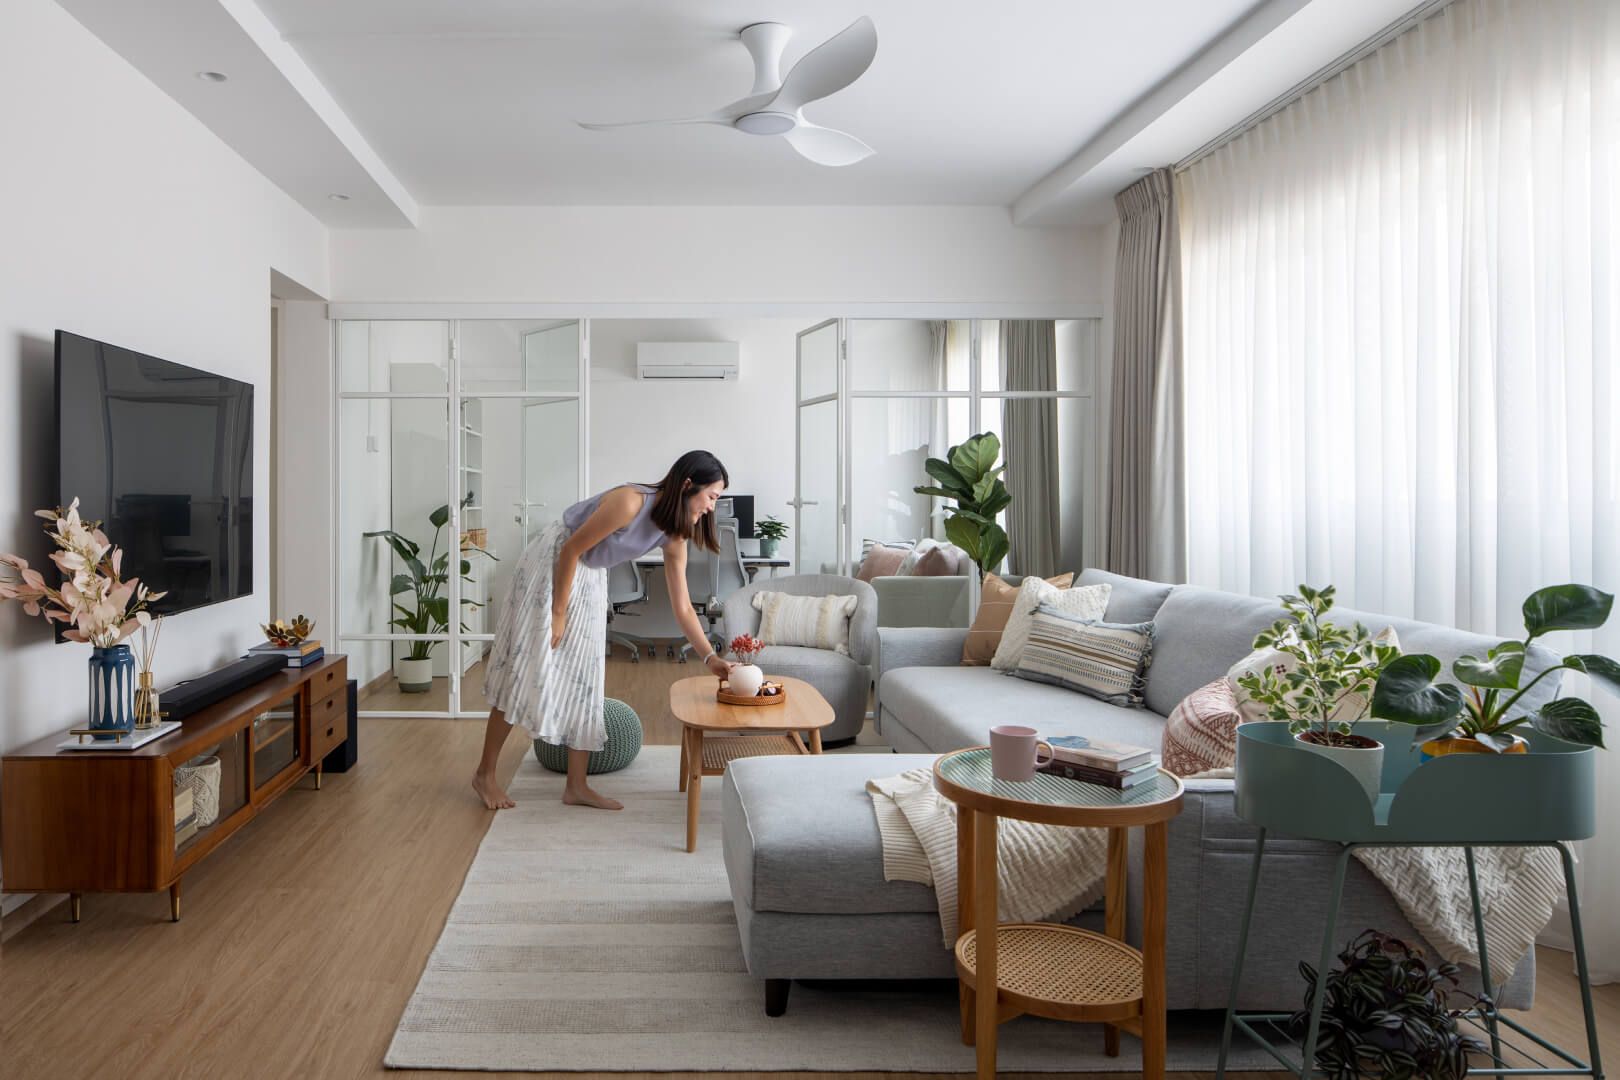 Bright and airy living room with a woman arranging decor, showcasing a grey sofa, wooden furniture, and lush indoor plants.